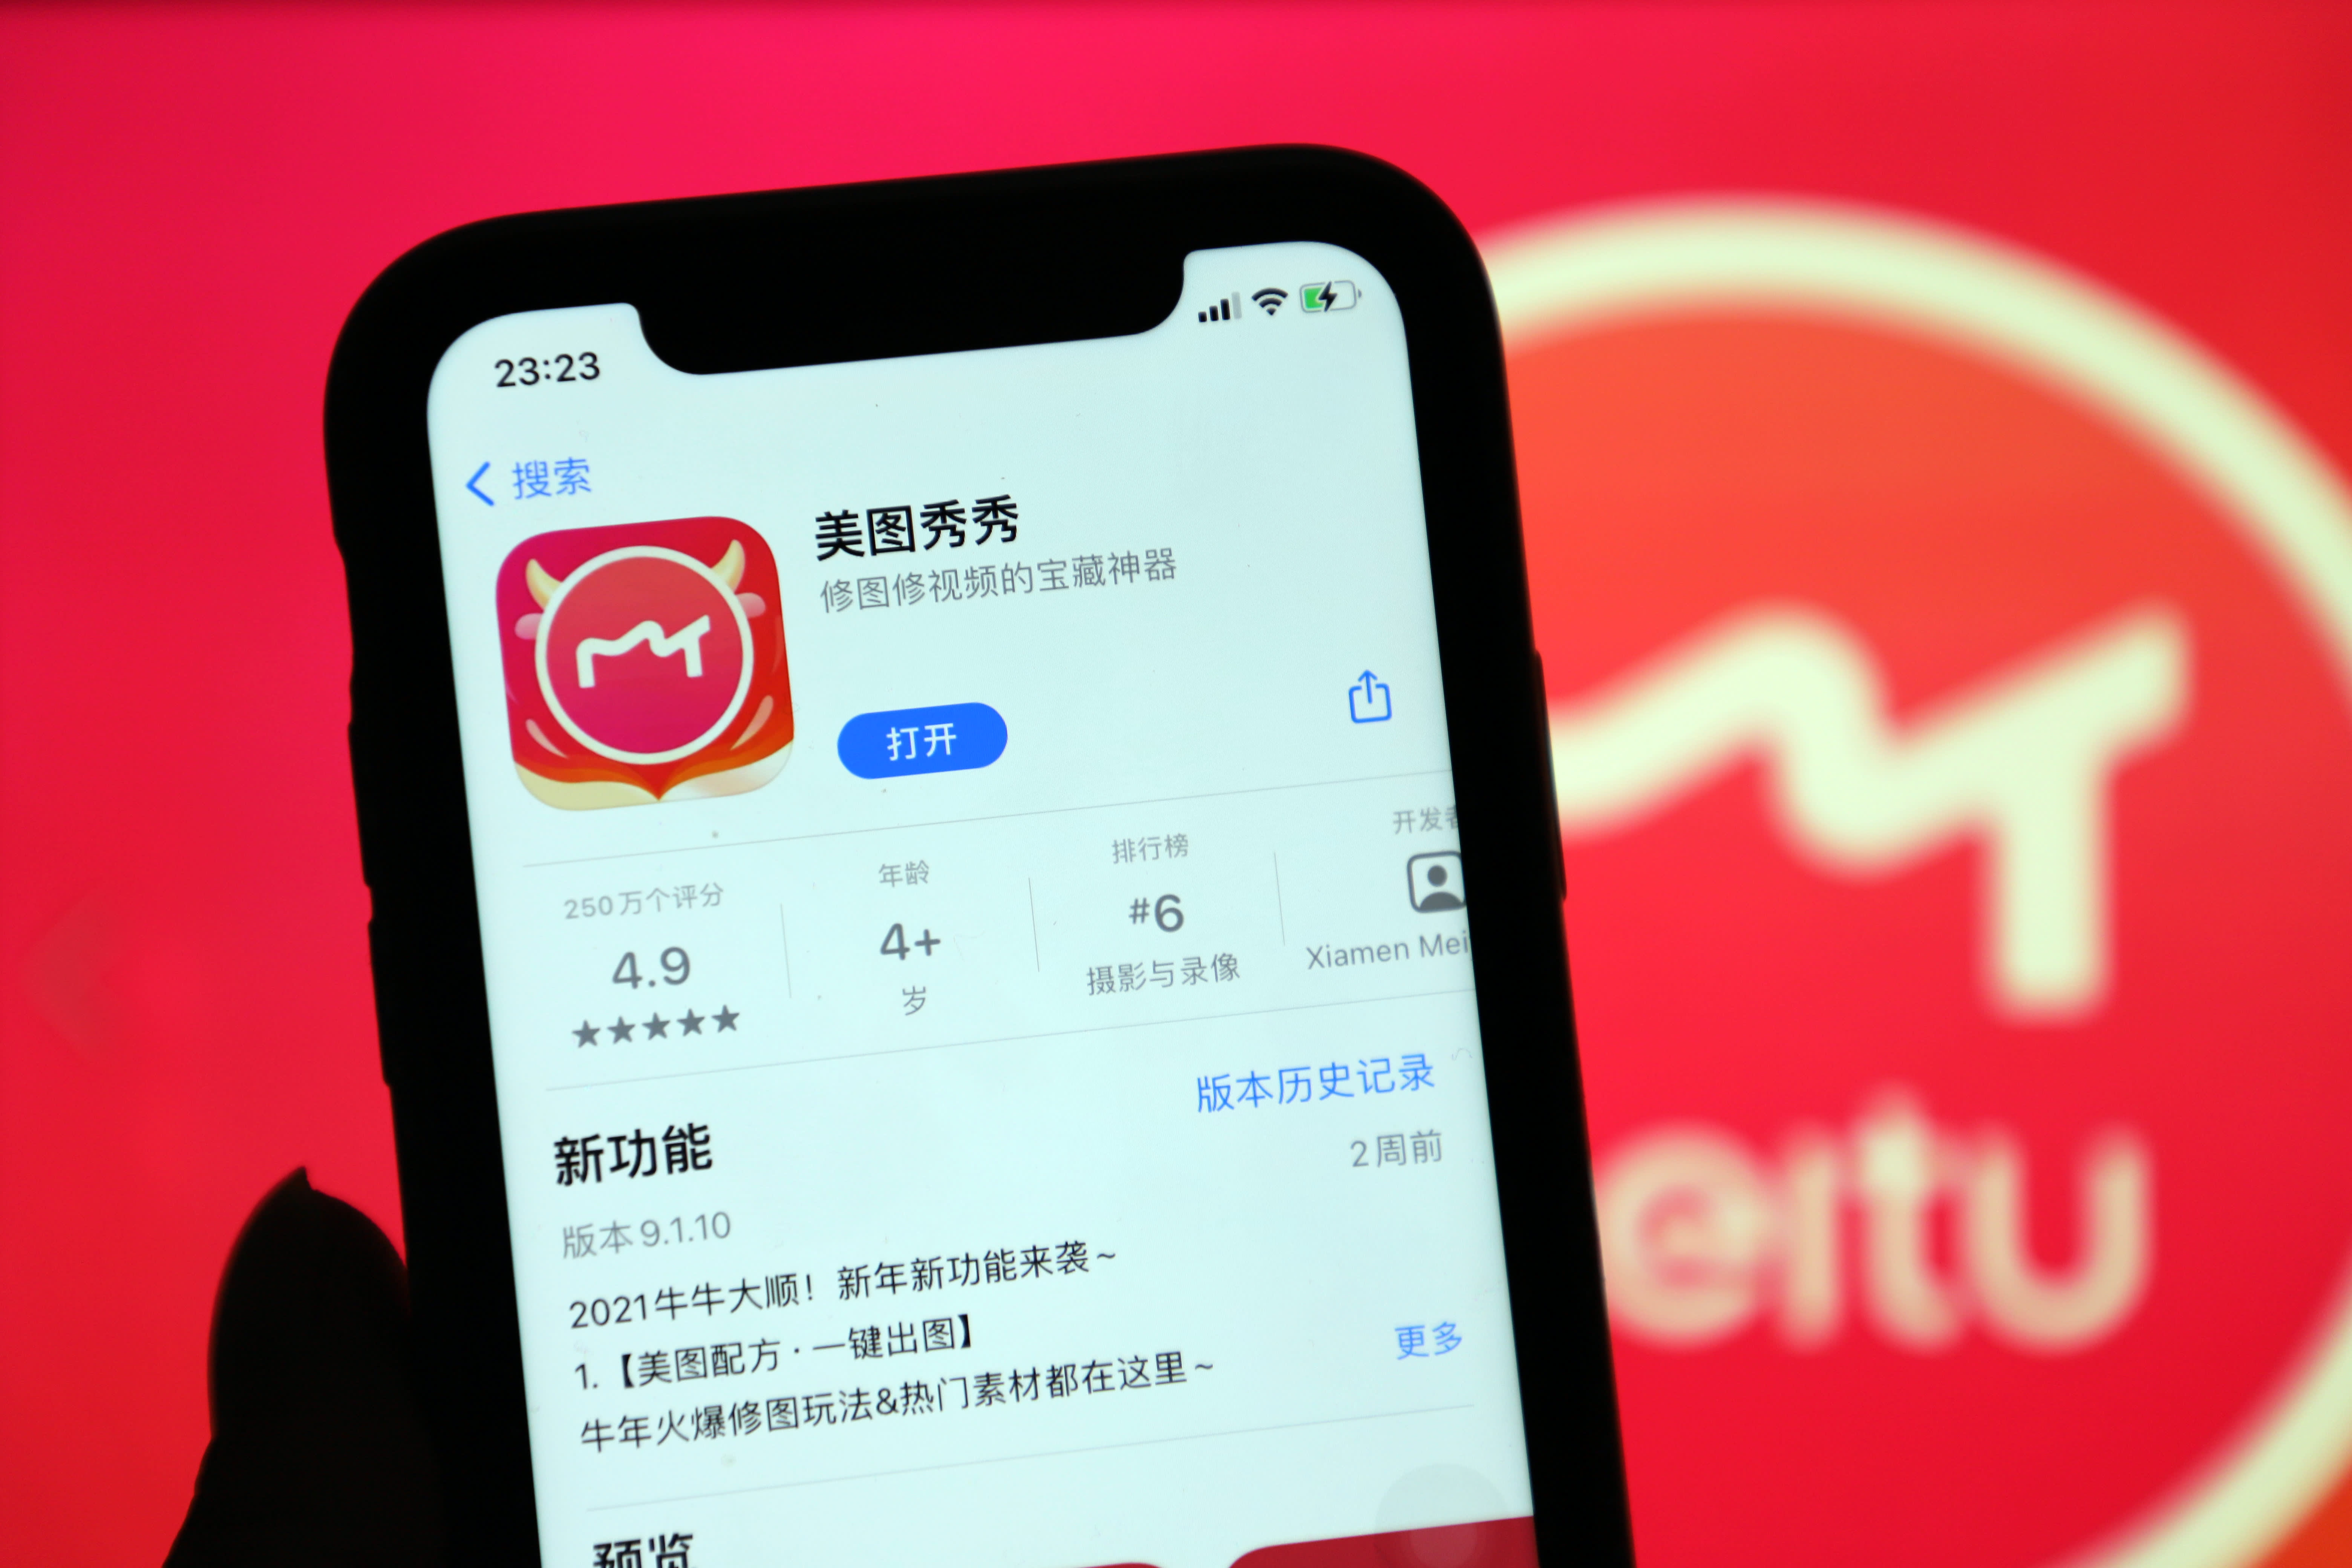 The Chinese app Meitu buys millions of bitcoin and etherum